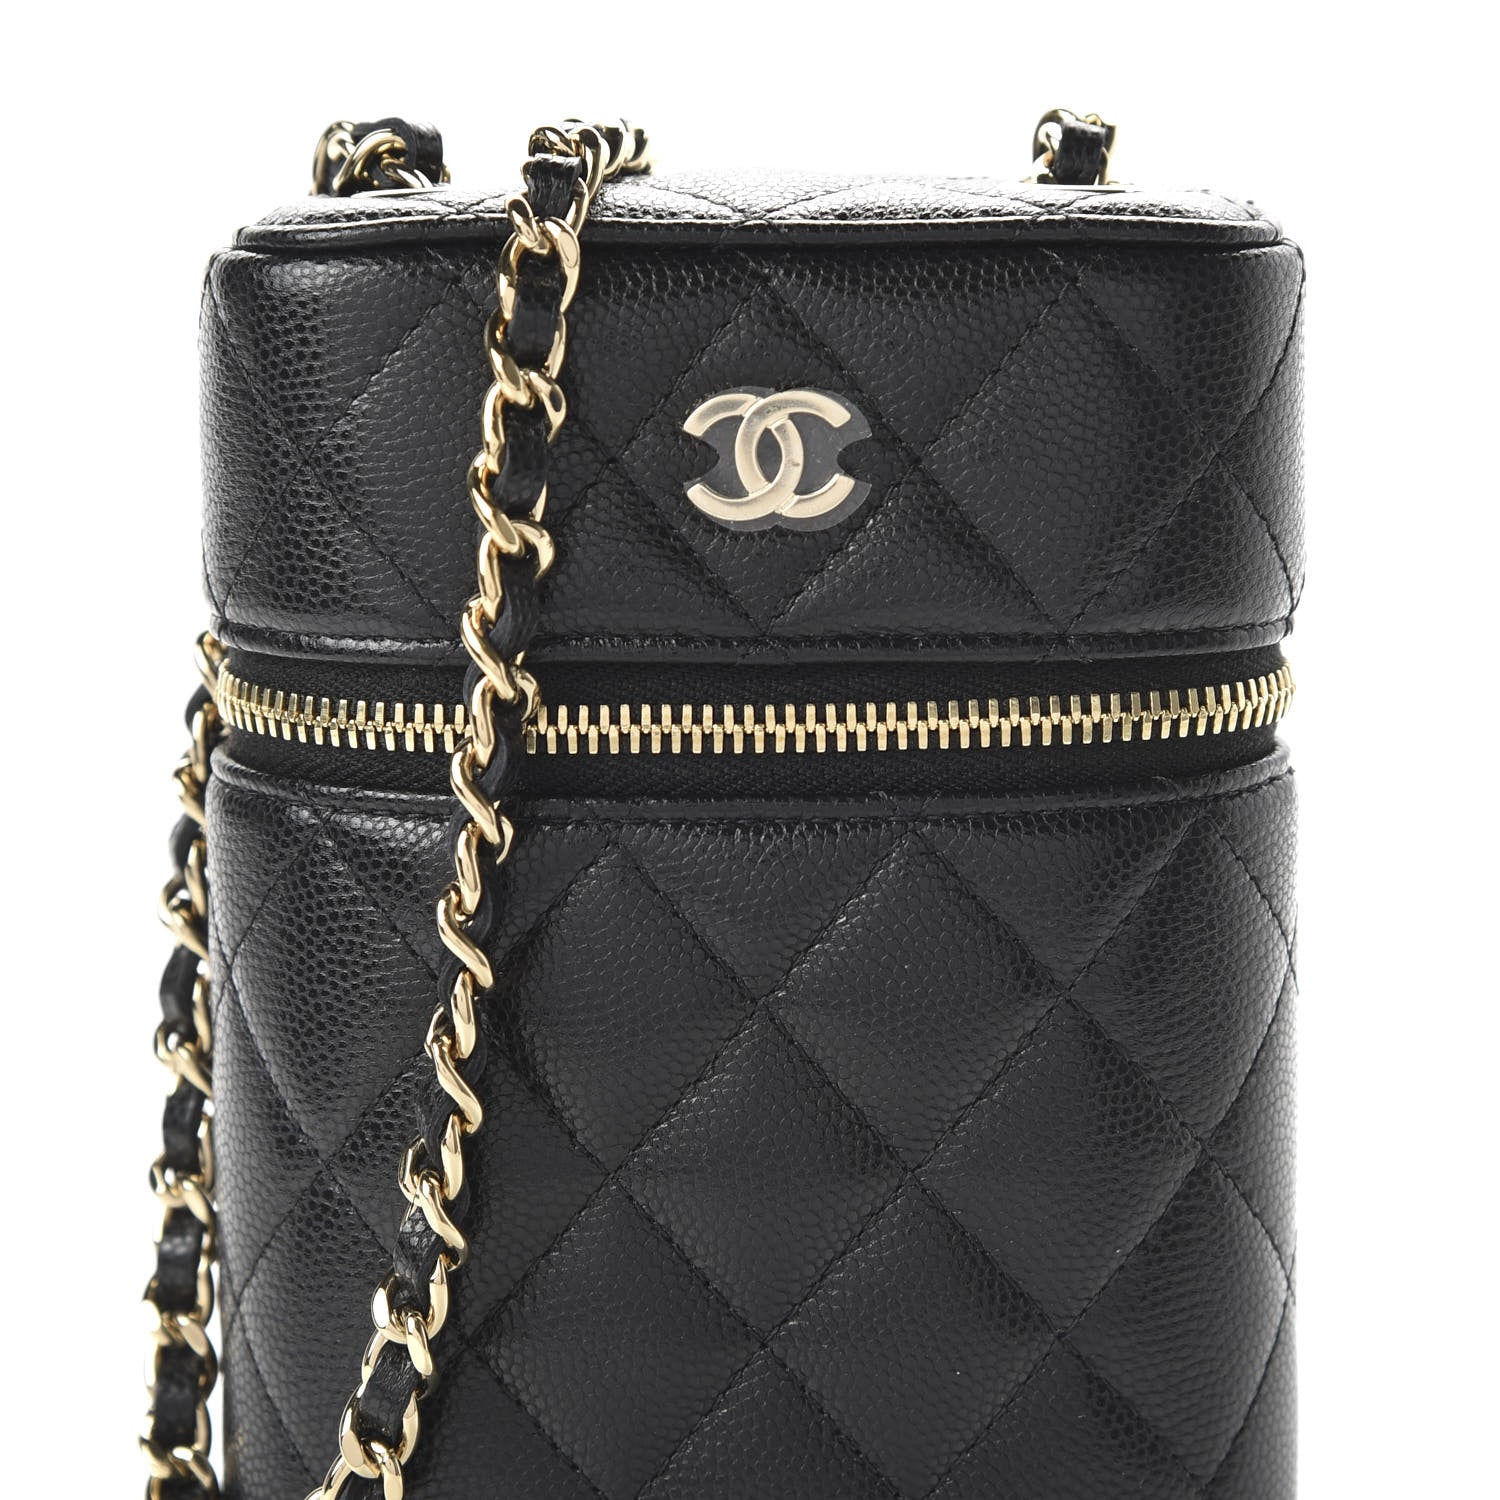 CHANEL CLASSIC CAVIAR QUILTED VANITY PHONE HOLDER WITH CHAIN – The